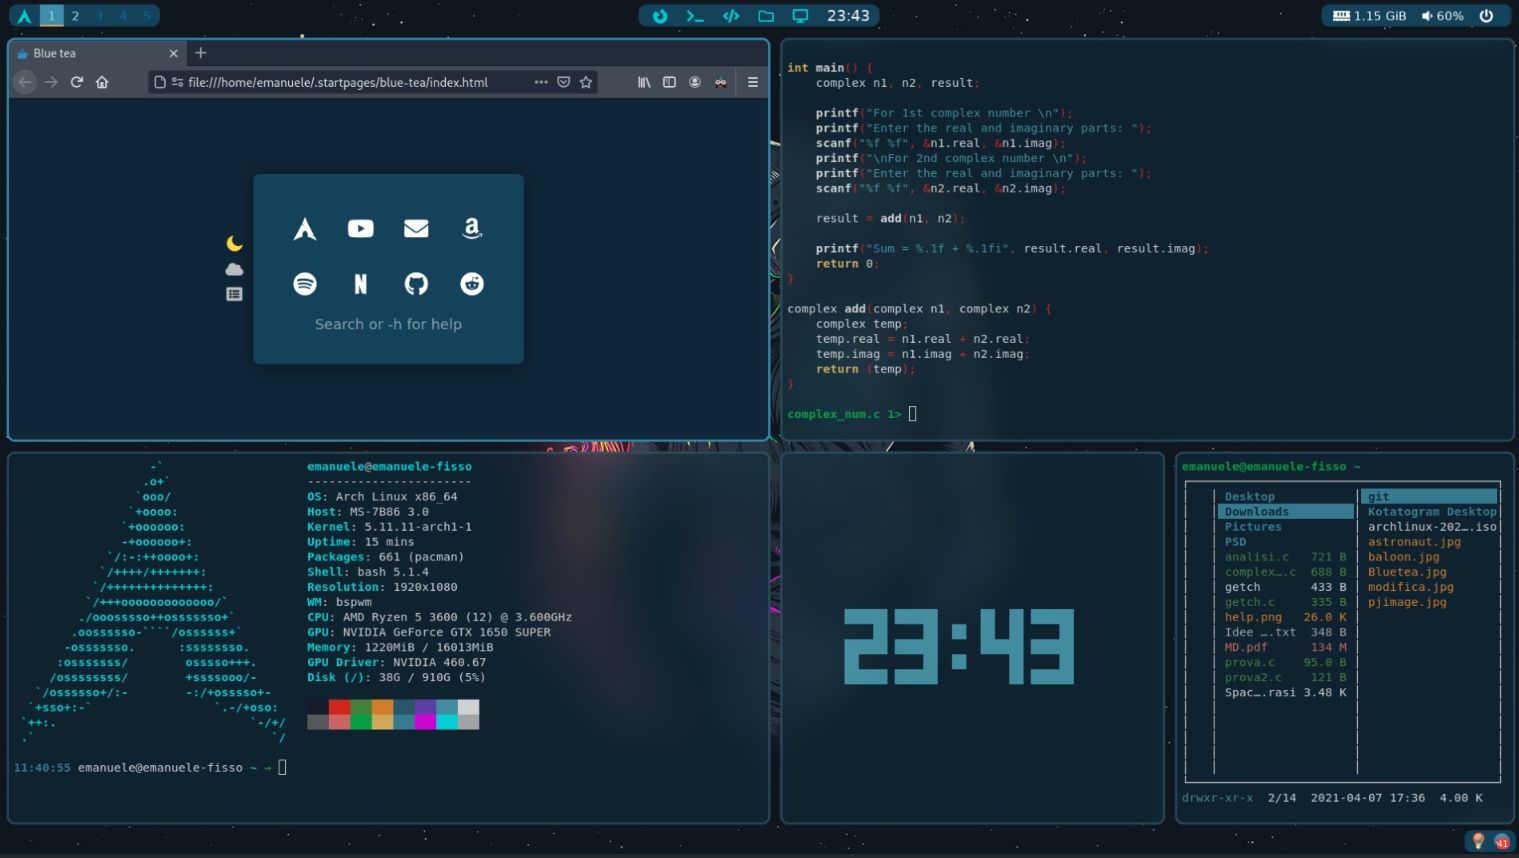 8 Best Window Managers for Linux